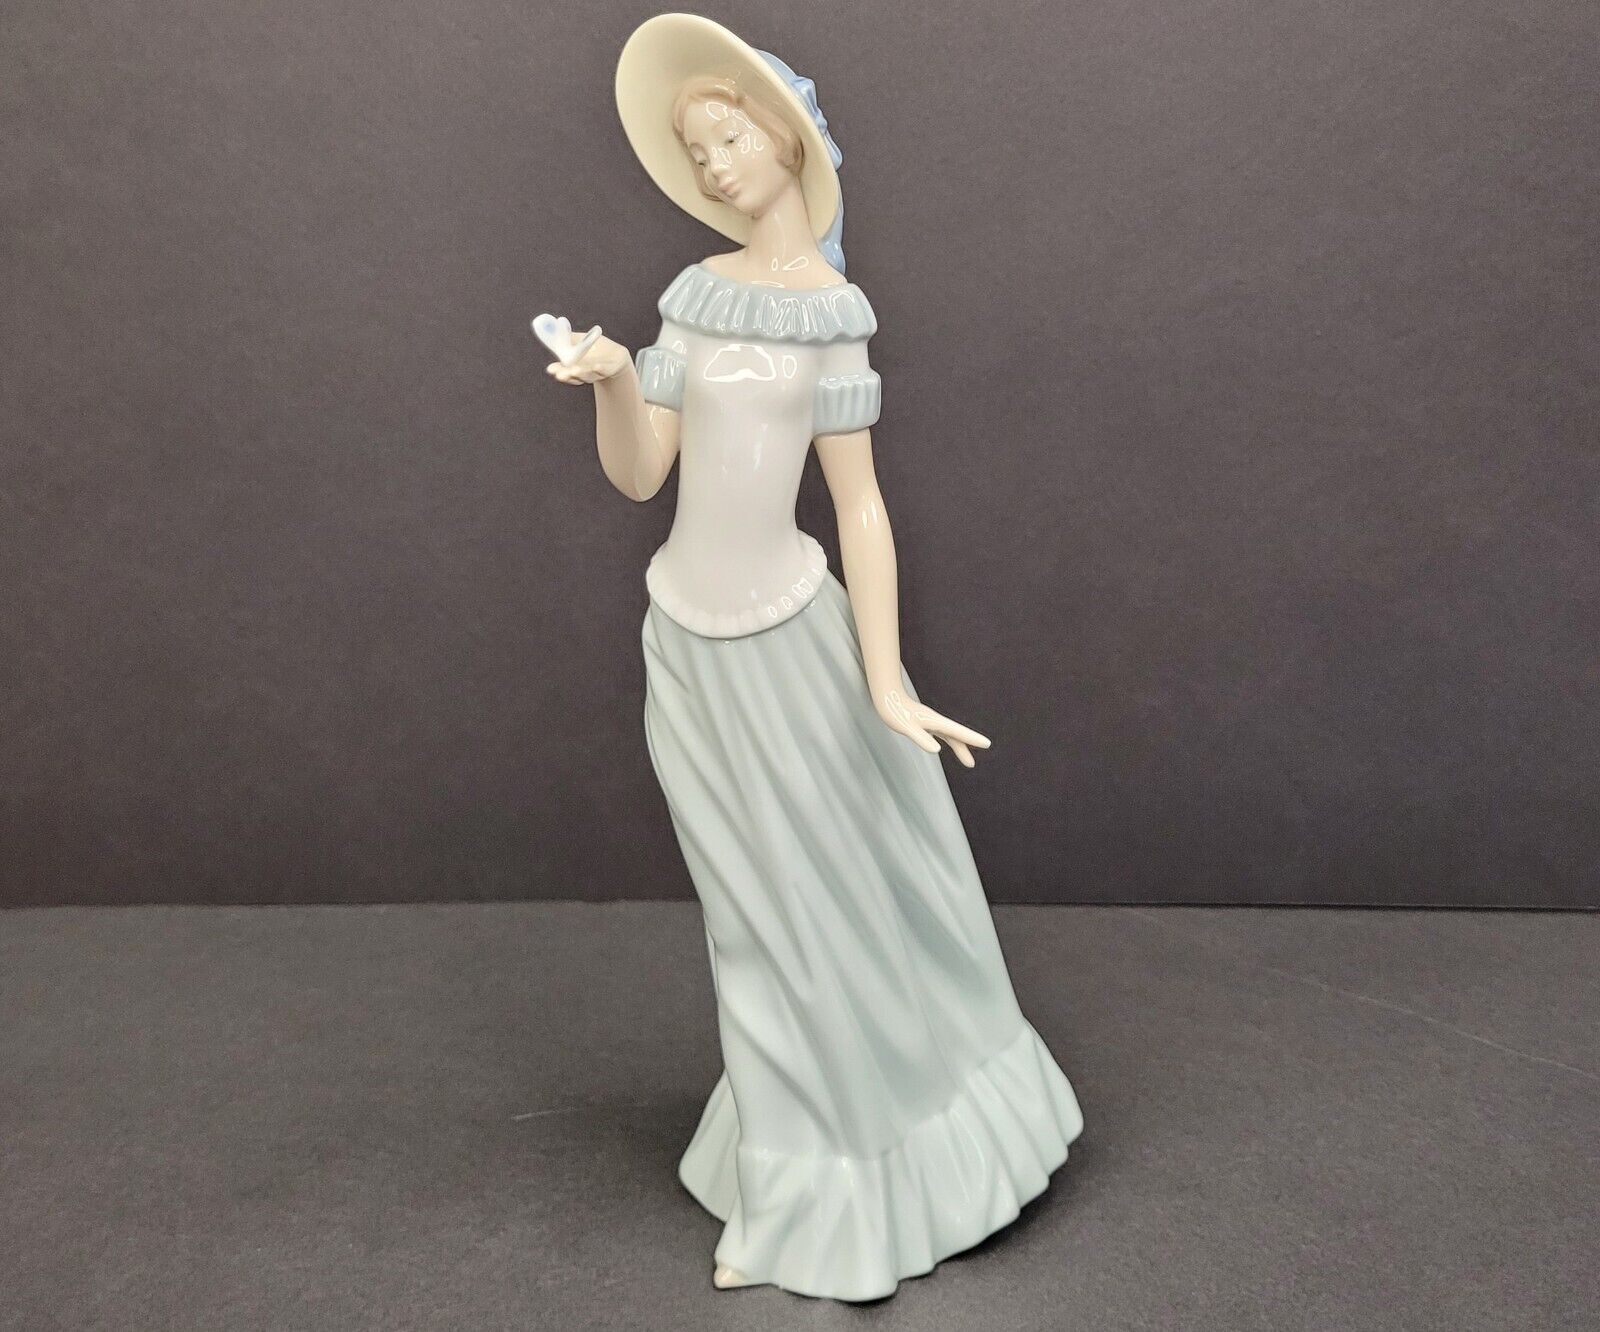 LLADRO NAO Figurine The Butterfly's Dance #1398 Porcelain Lady Made in Spain